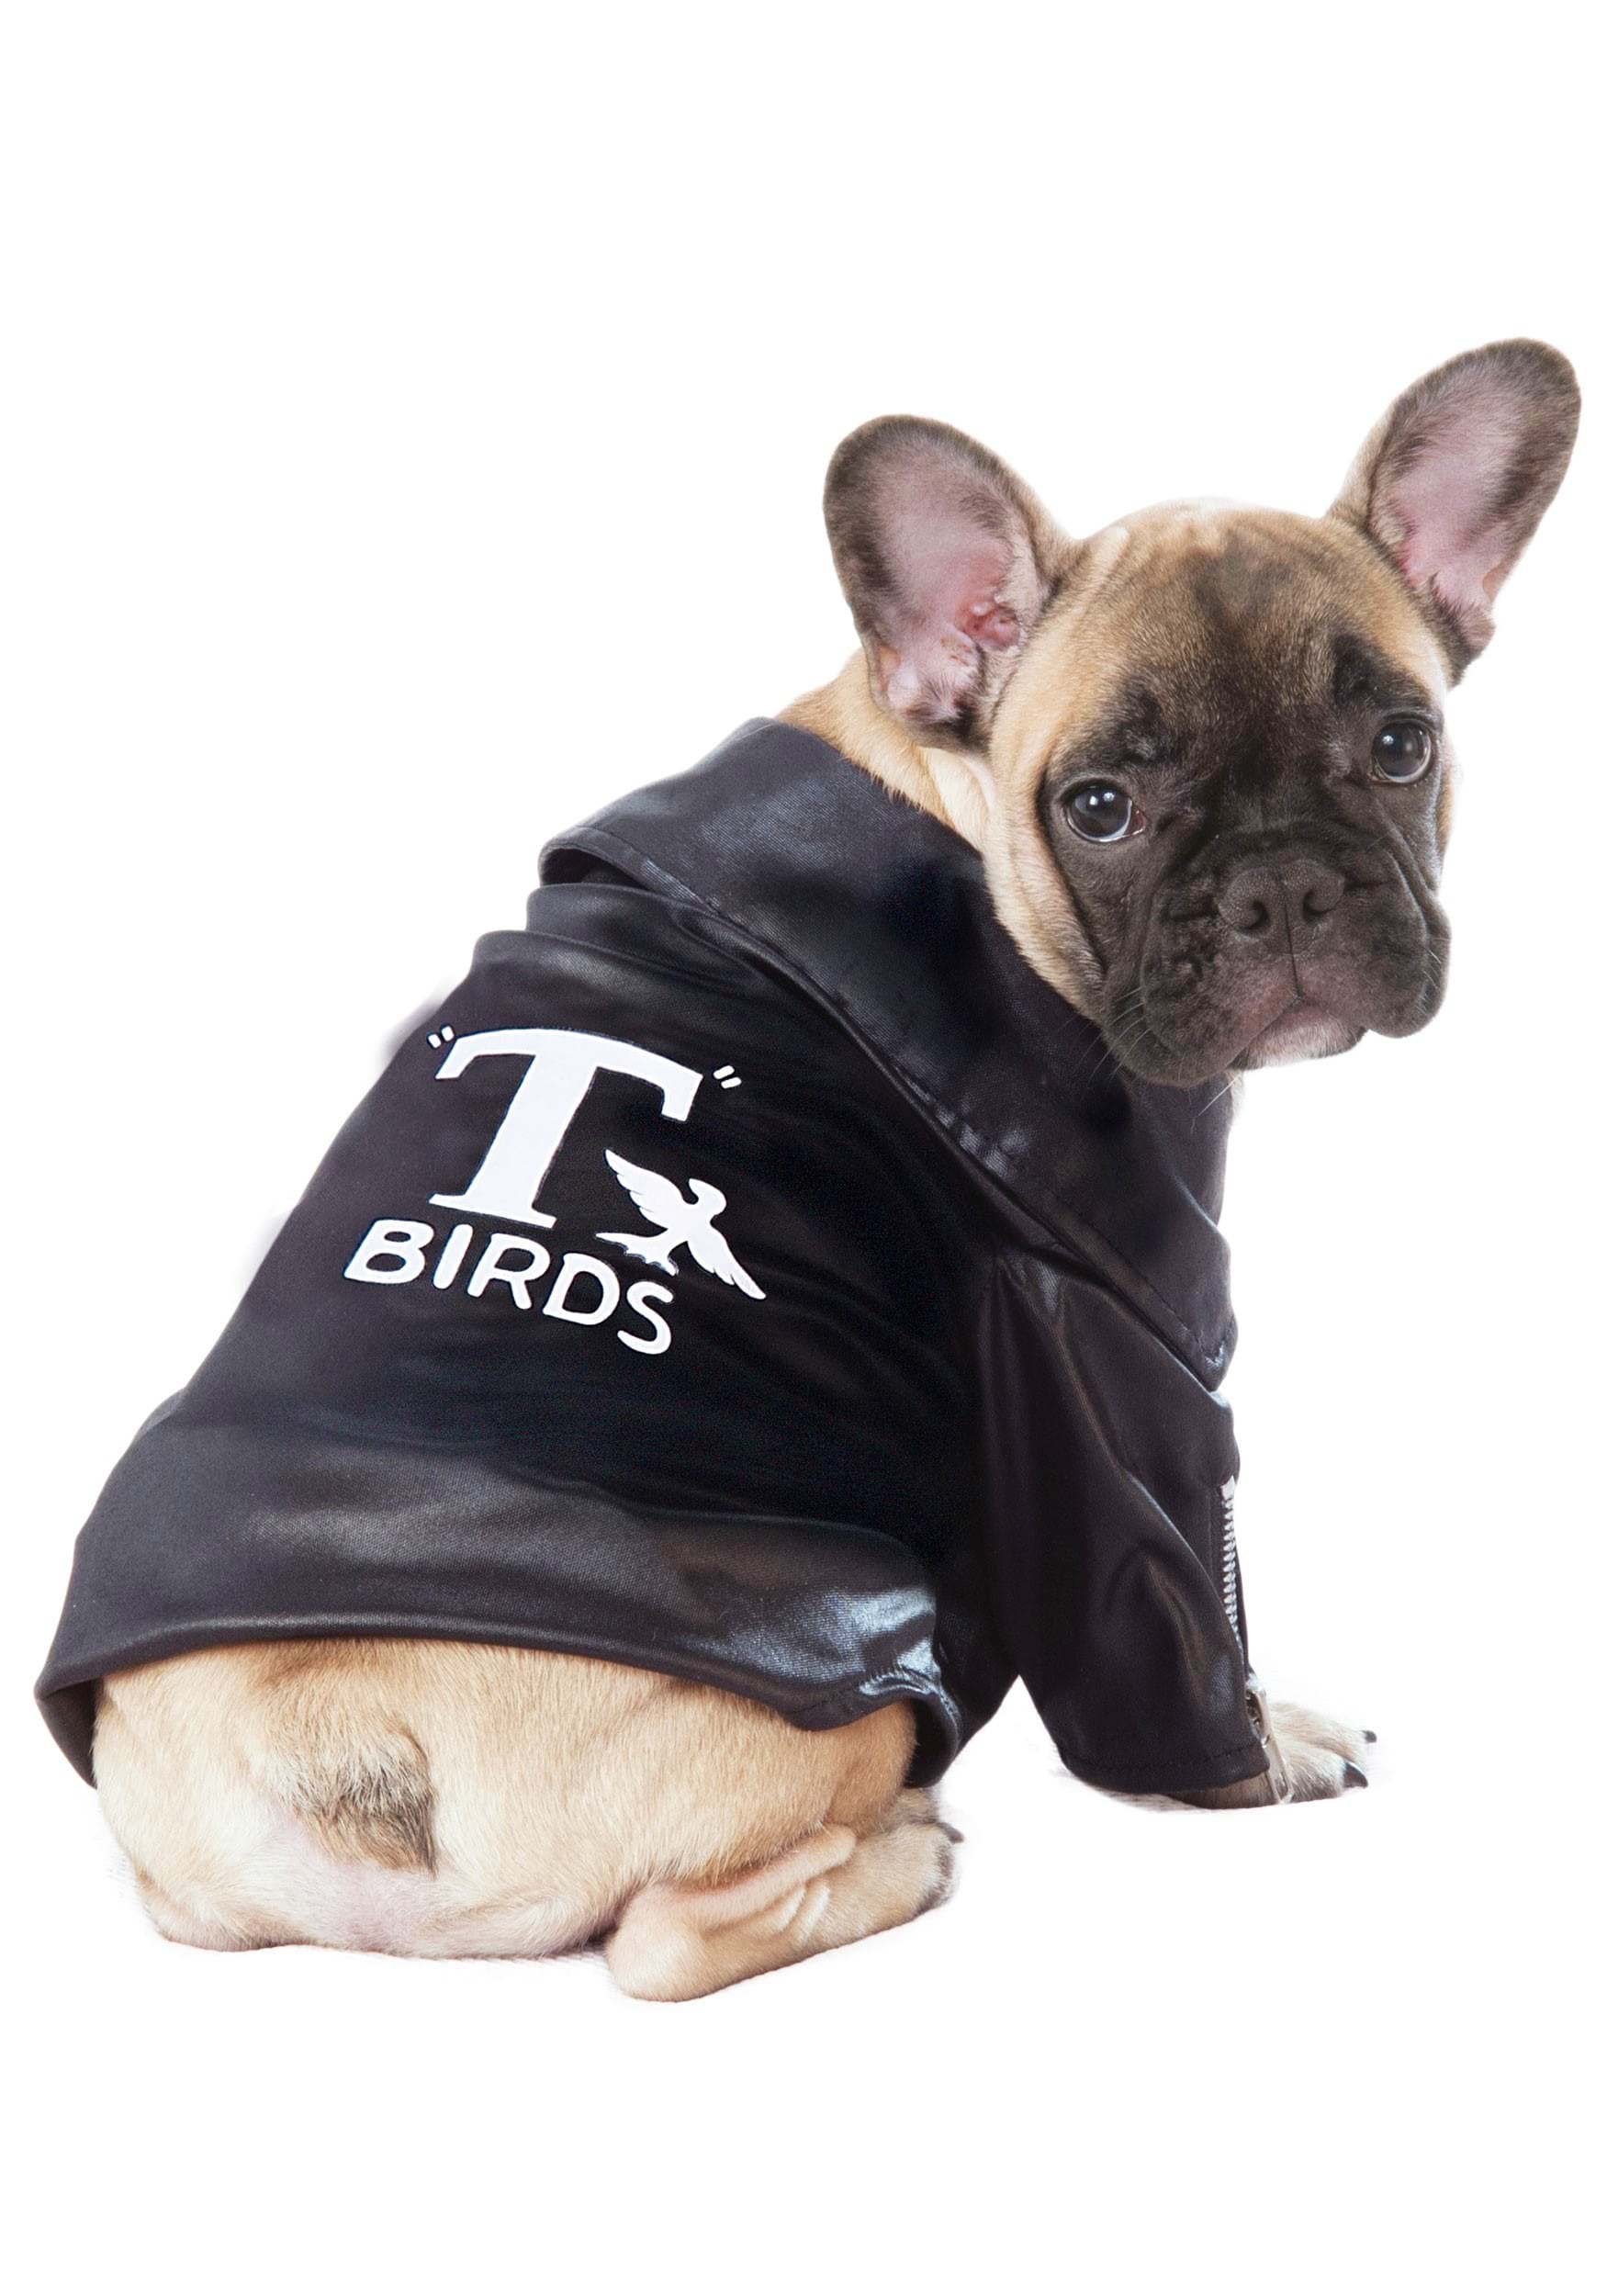 Photos - Fancy Dress Rubies Costume Co. Inc Grease T-Birds Cool Jacket Pet Costume Black/Wh 